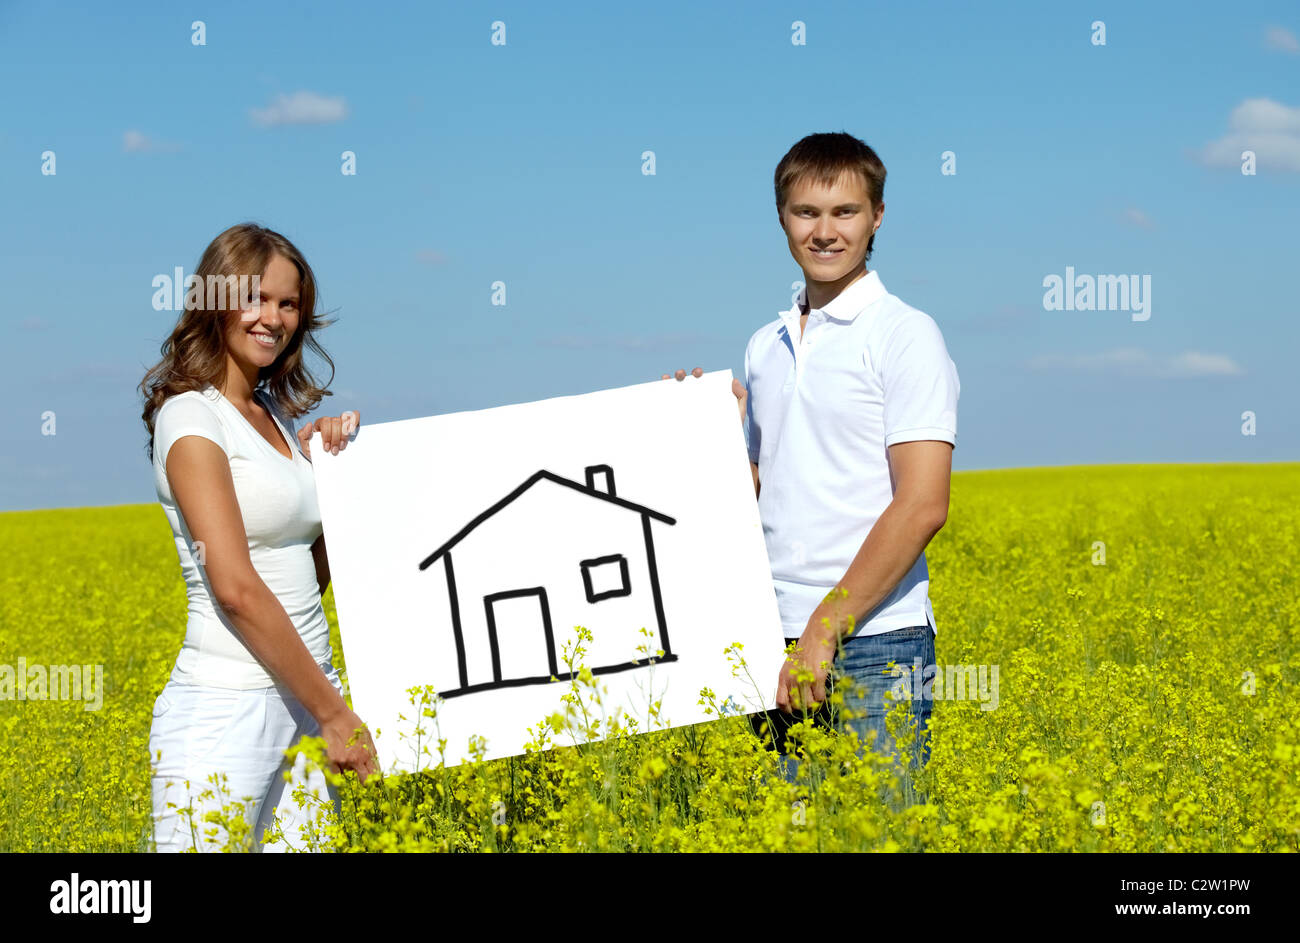 Portrait of happy young couple showing house drwan on paper in meadow Stock Photo